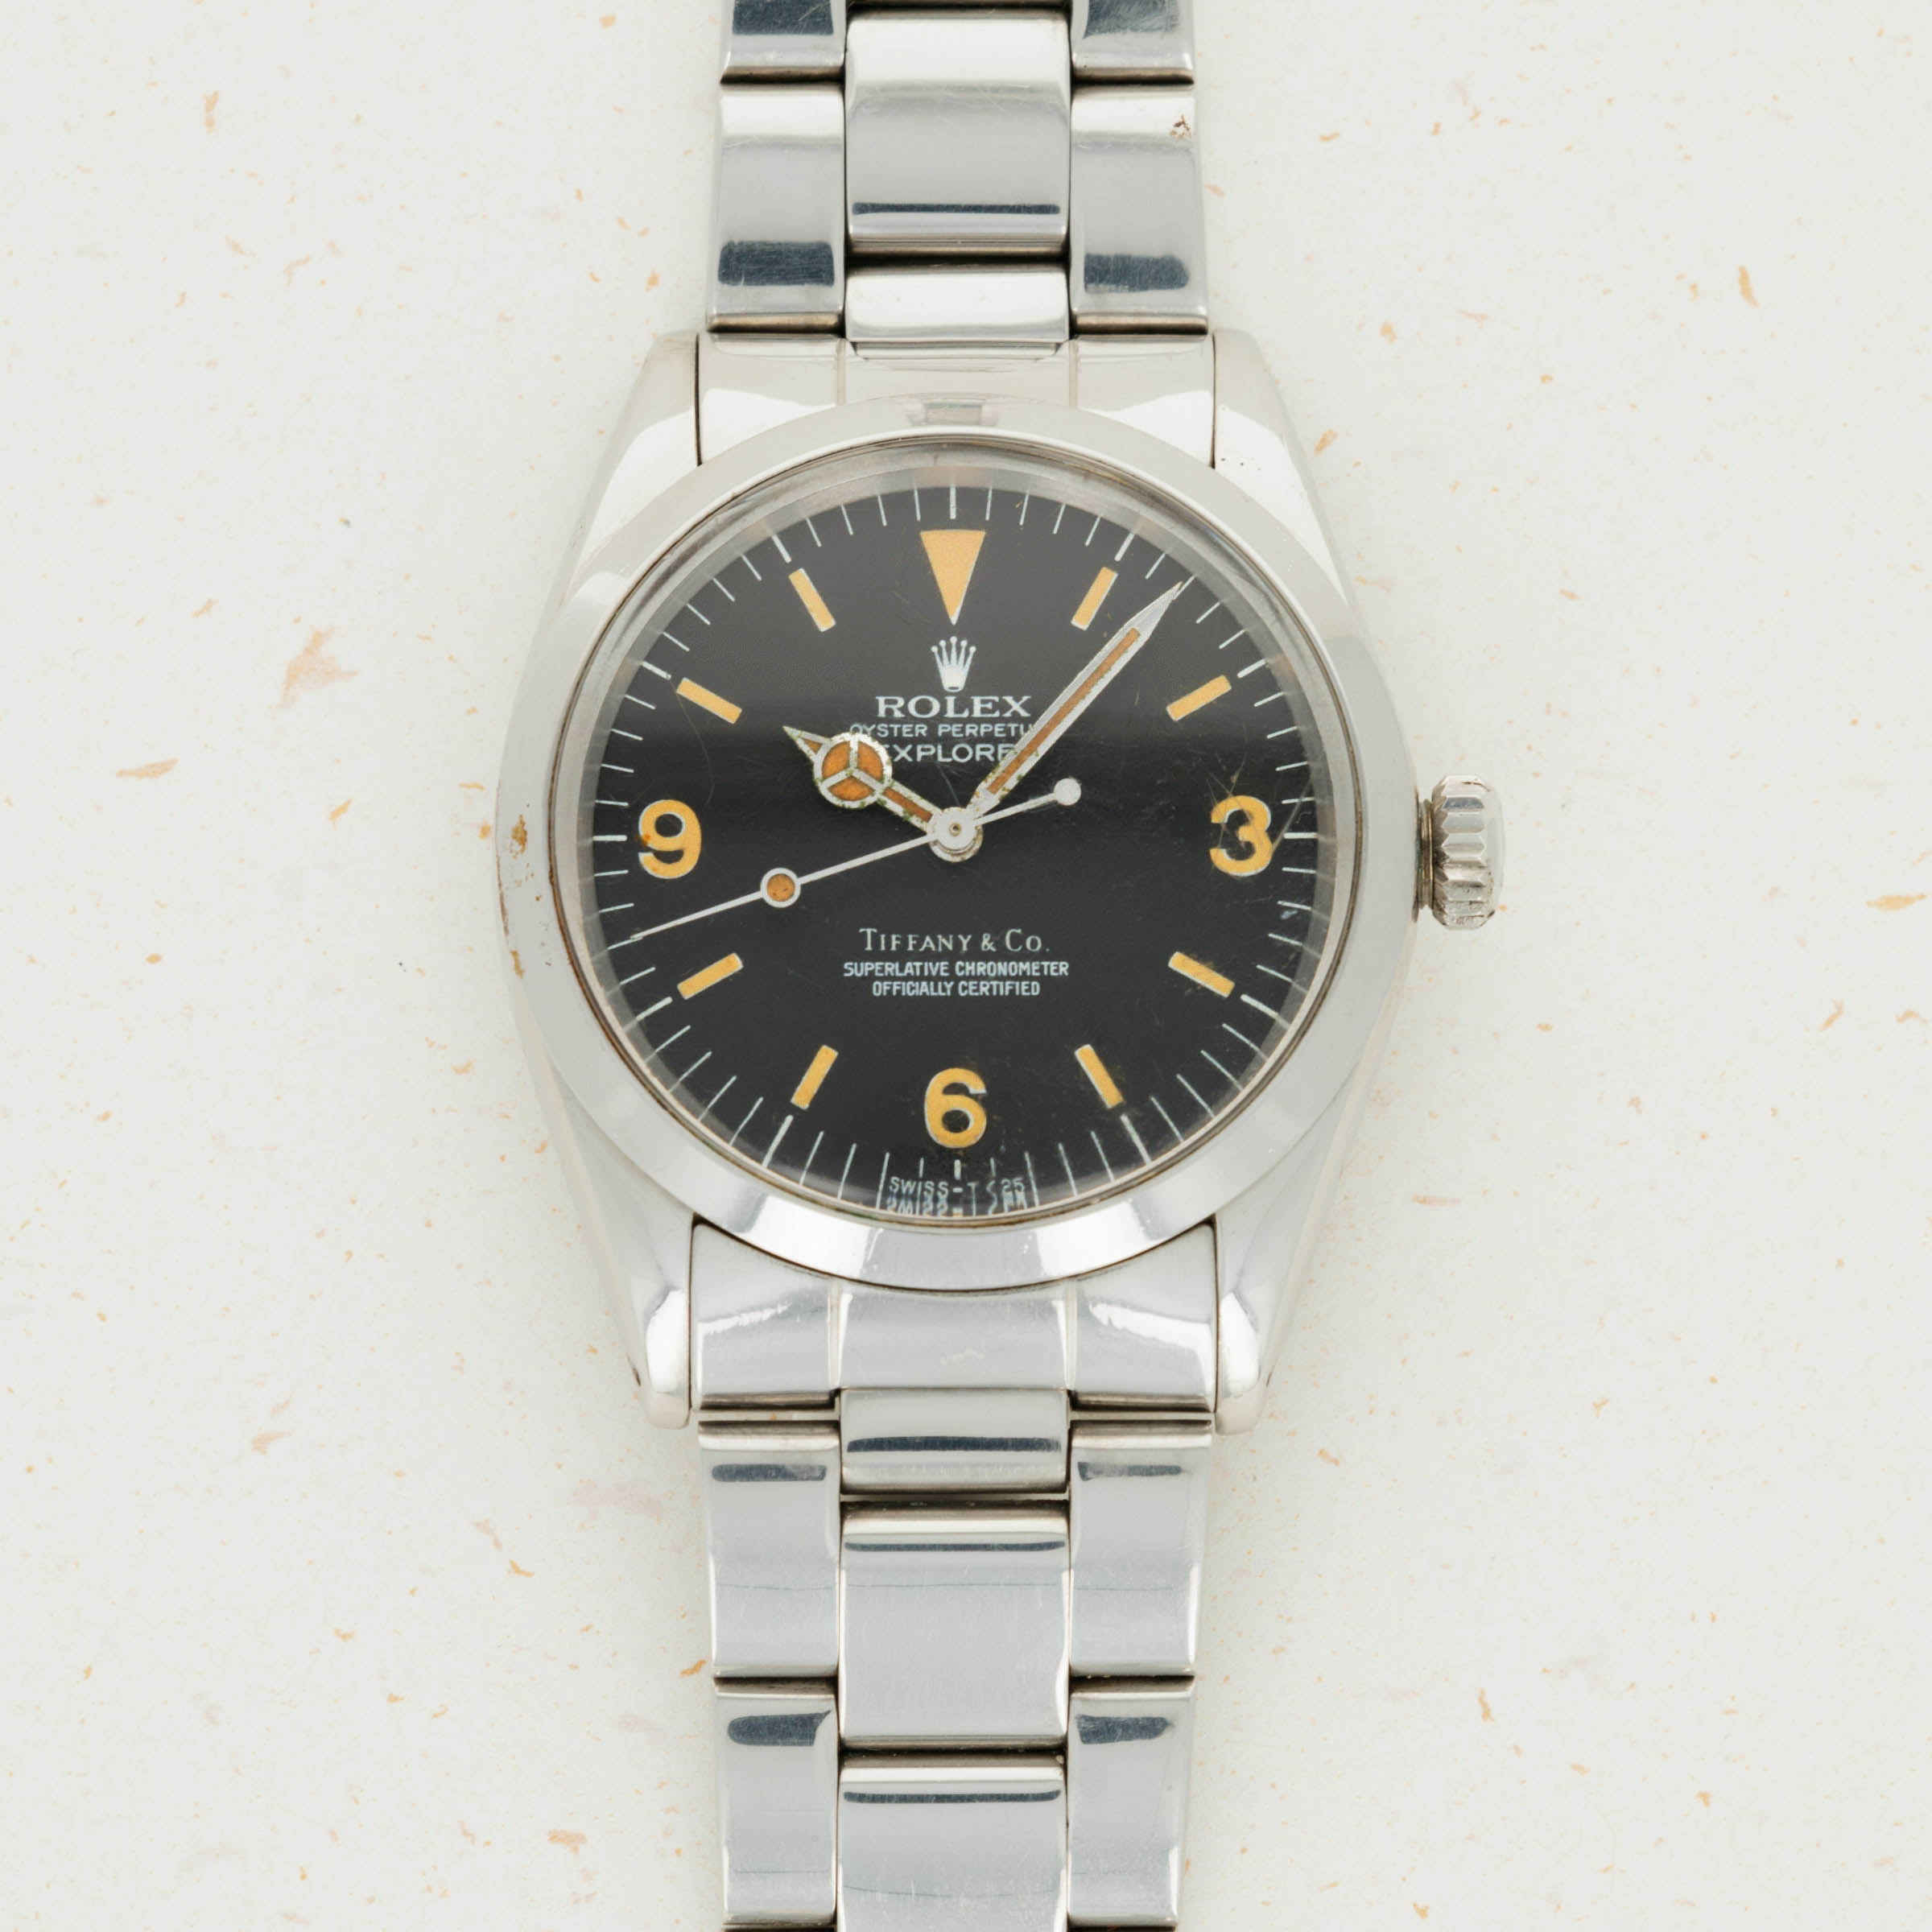 Rolex Explorer I Ref 1016 Gilt Swiss Underline Tropical From 1963 for  $29,398 for sale from a Trusted Seller on Chrono24